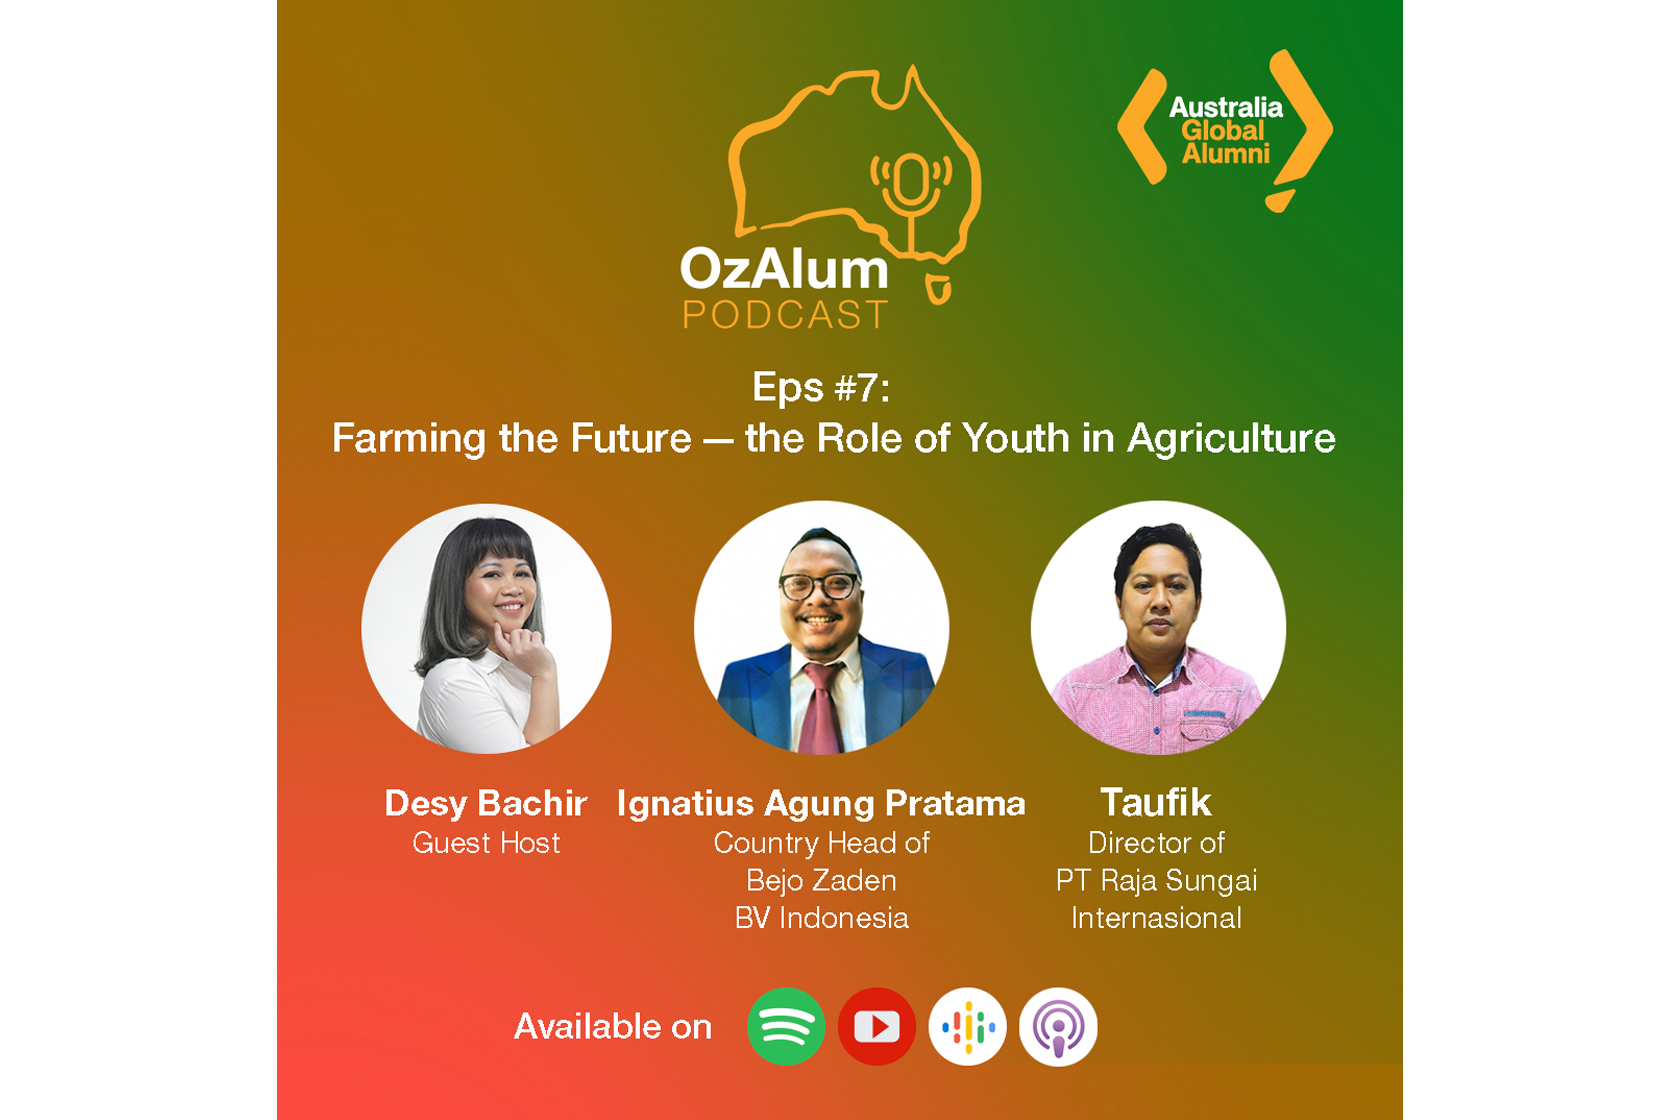 OzAlum Podcast Eps #7: Farming the Future – the Role of Youth in Agriculture